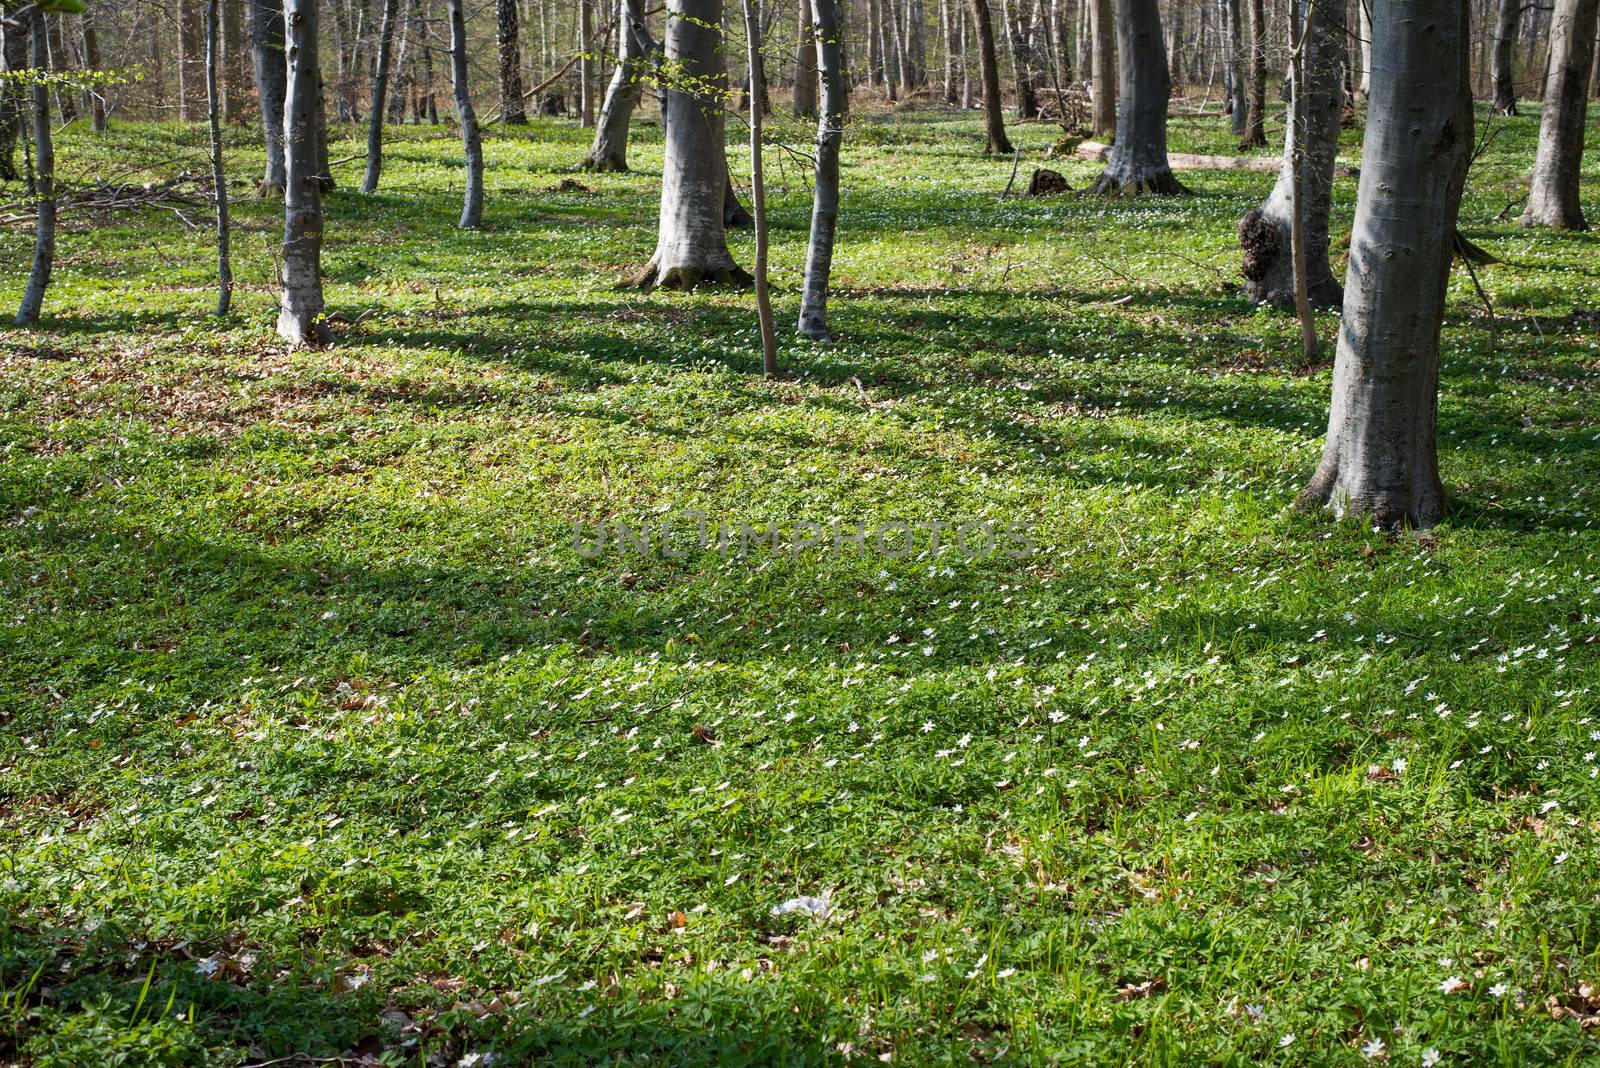 Forest floor in spring with wood anemones and green cover